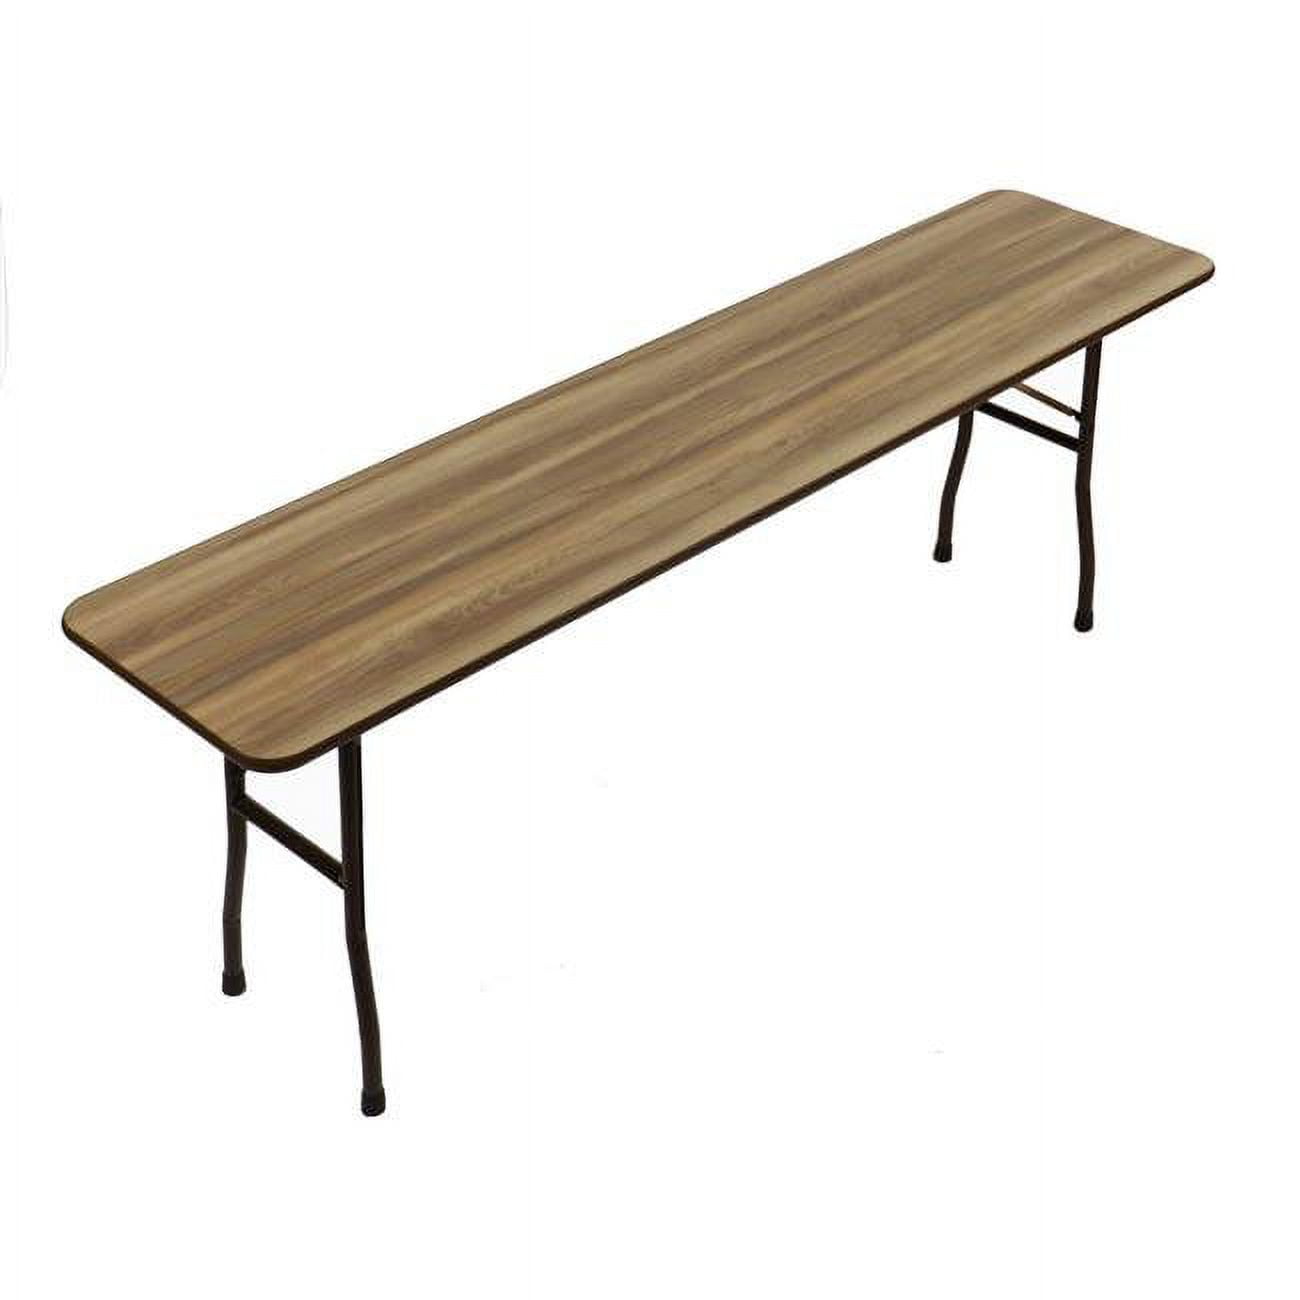 Cf3072px-53 0.75 In. High Pressure Rectangular Top Folding Tables, Colonial Hickory - 30 X 72 In.